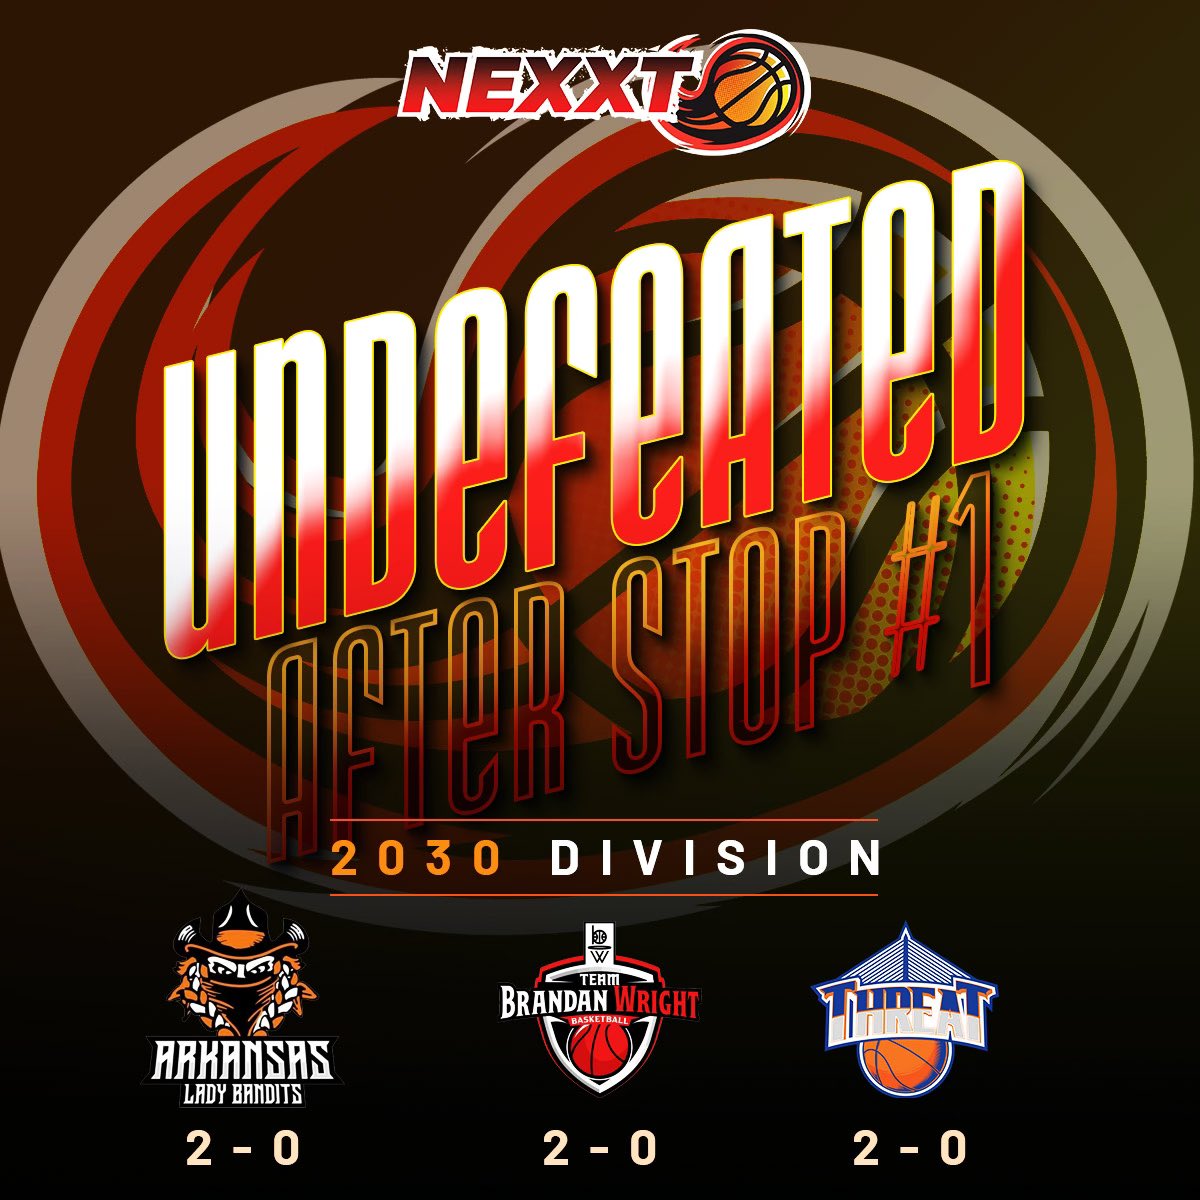 🛑 #1- CLEVELAND S/O to out unbeaten teams thru Stop #1 2028- Centax Attack Proday Lady Lightning Sideline Cancer Skyhook 2029- Midwest Hoops Sideline Cancer SMAC Elite Where2Next 2030- Arkansas Lady Bandits Team B Wright Black Threat #NEXXTLeague